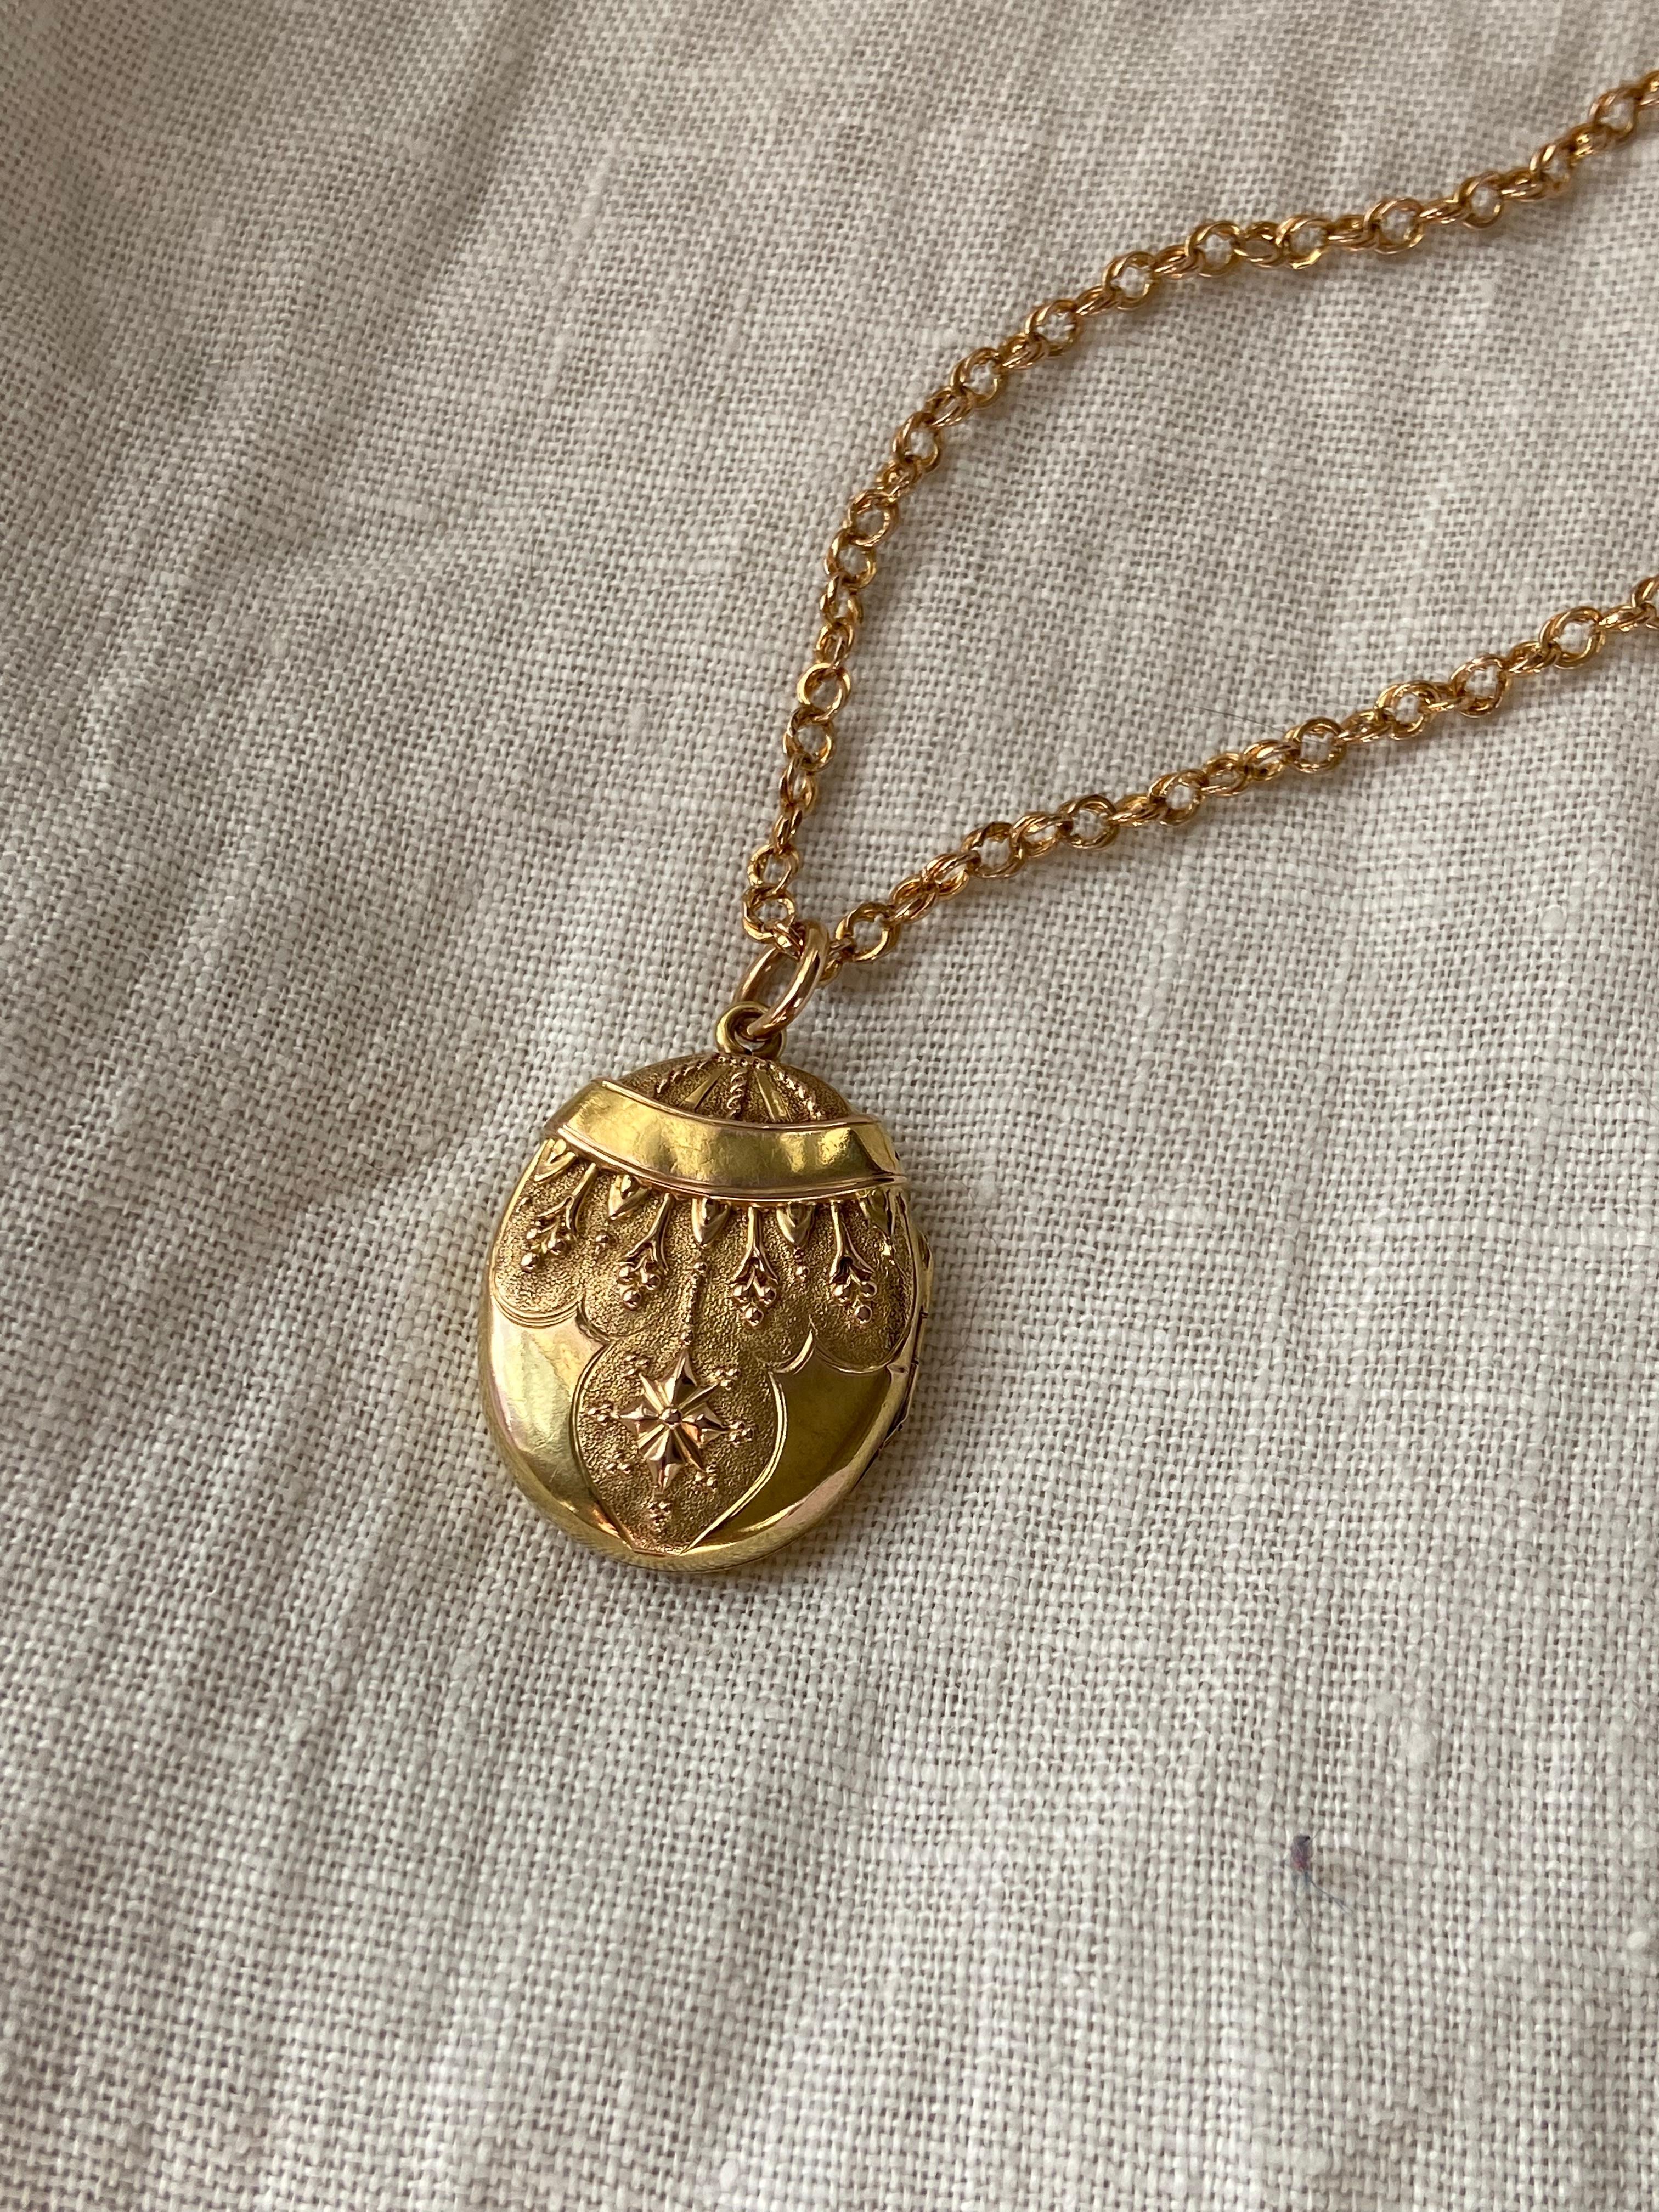 Etruscan Revival Late Victorian Ornate Oval Locket with Chain 9ct Gold  For Sale